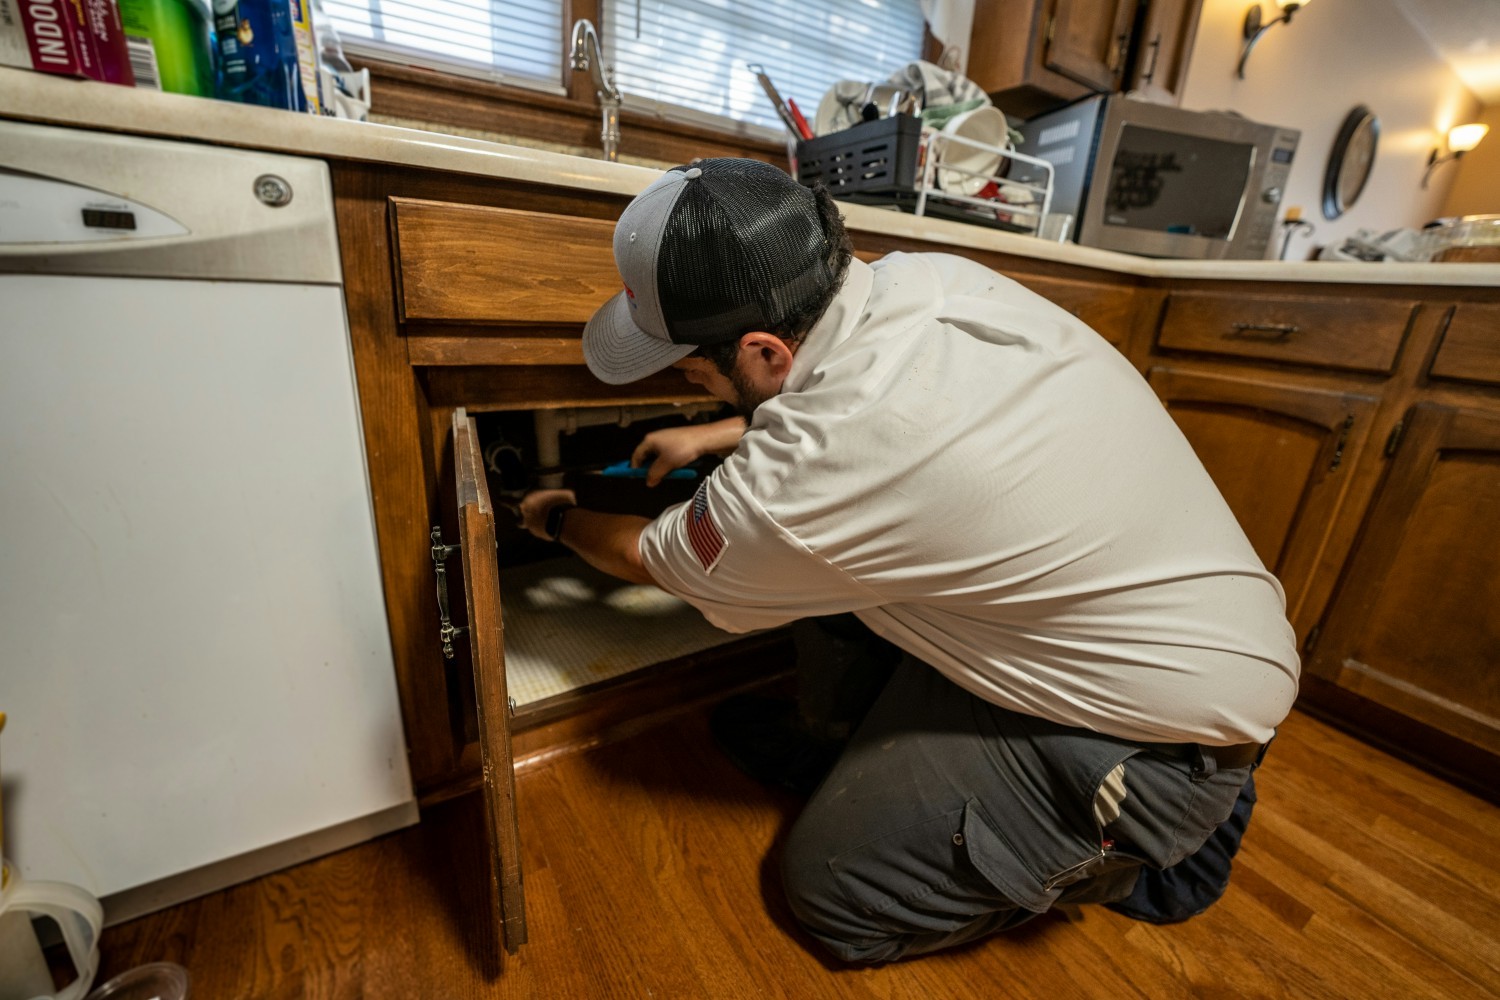 Waldrop offers plumbing service and install.